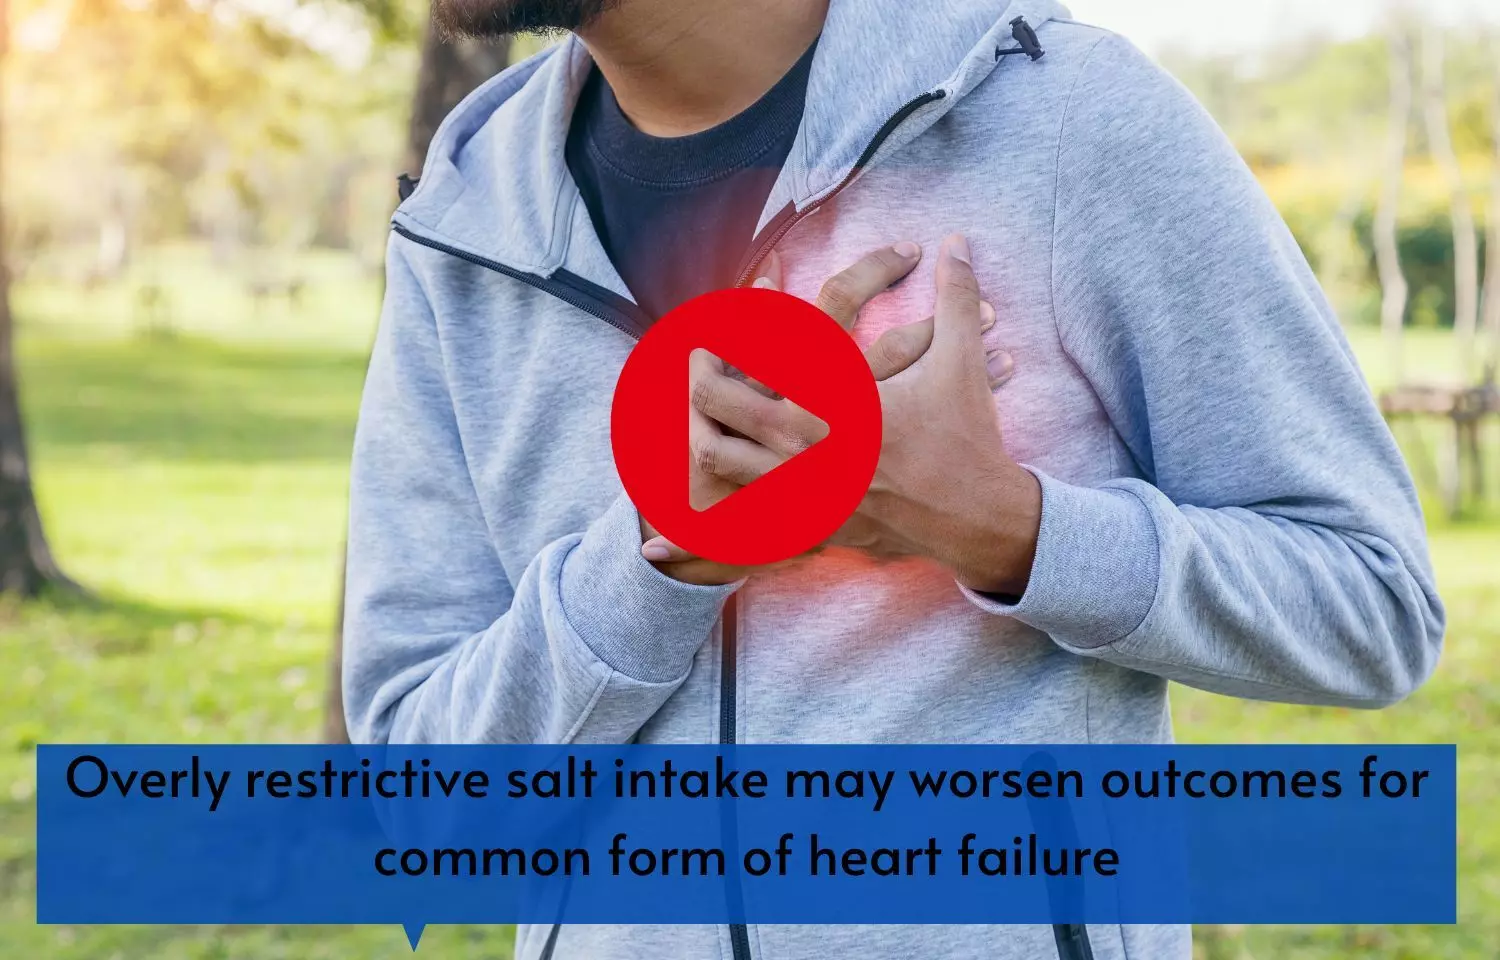 Overly restrictive salt intake may worsen outcomes for common form of heart failure